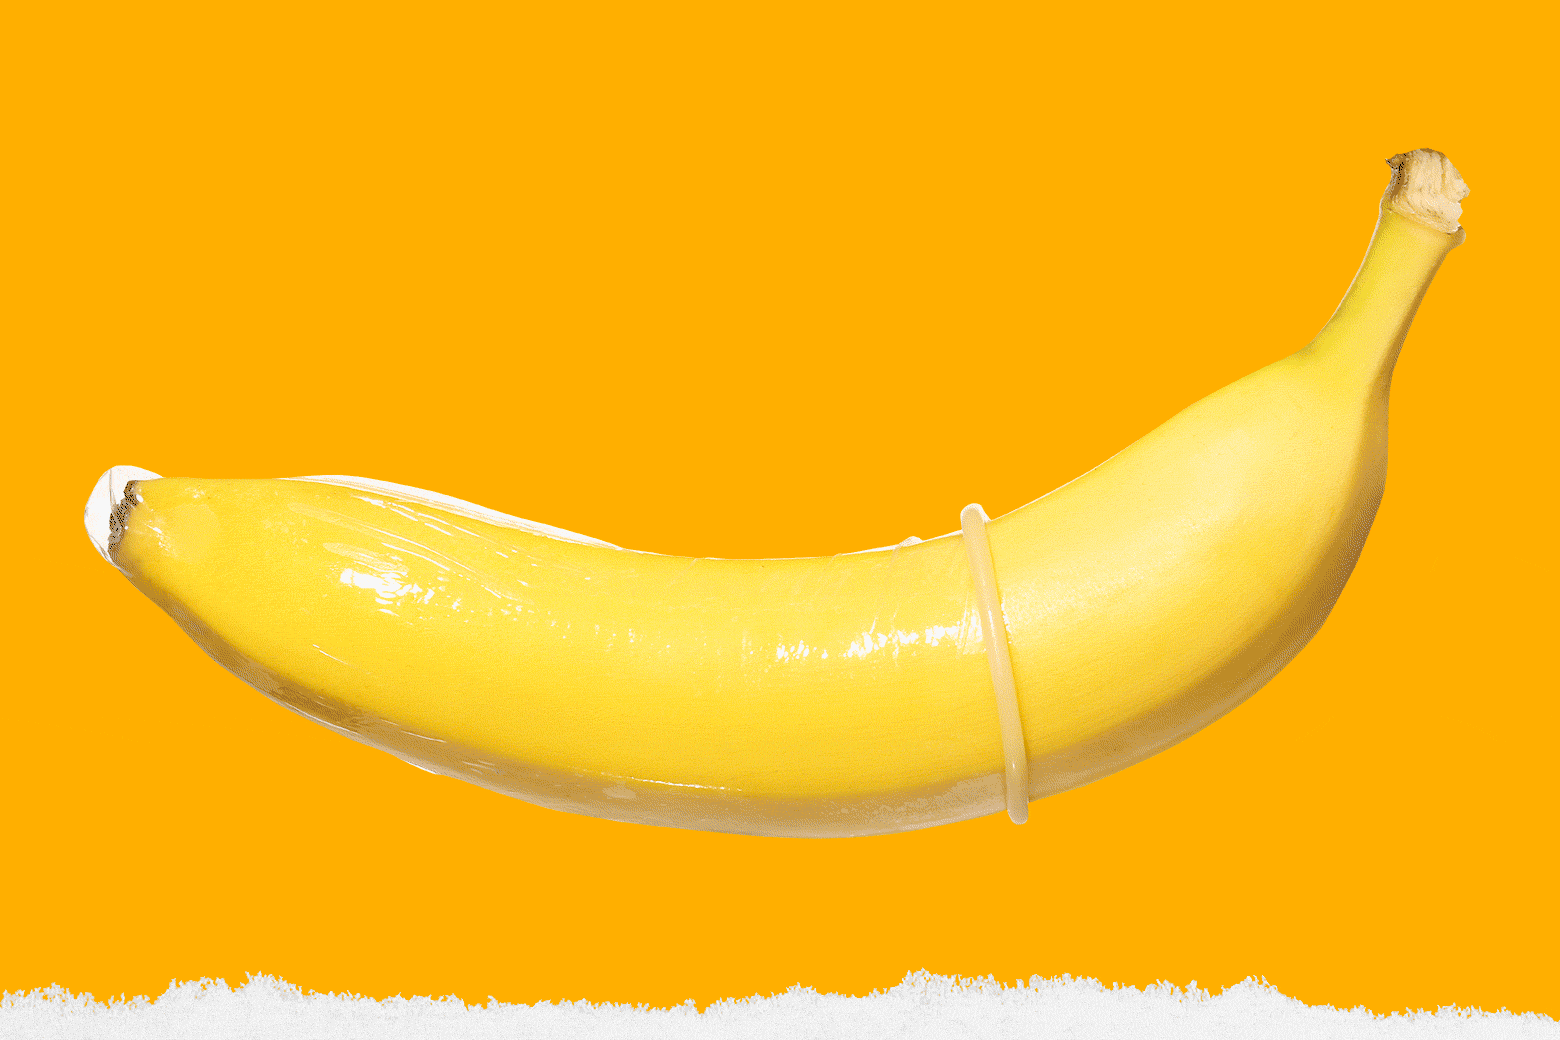 GIF of a condom-covered banana, then a banana that is condomless